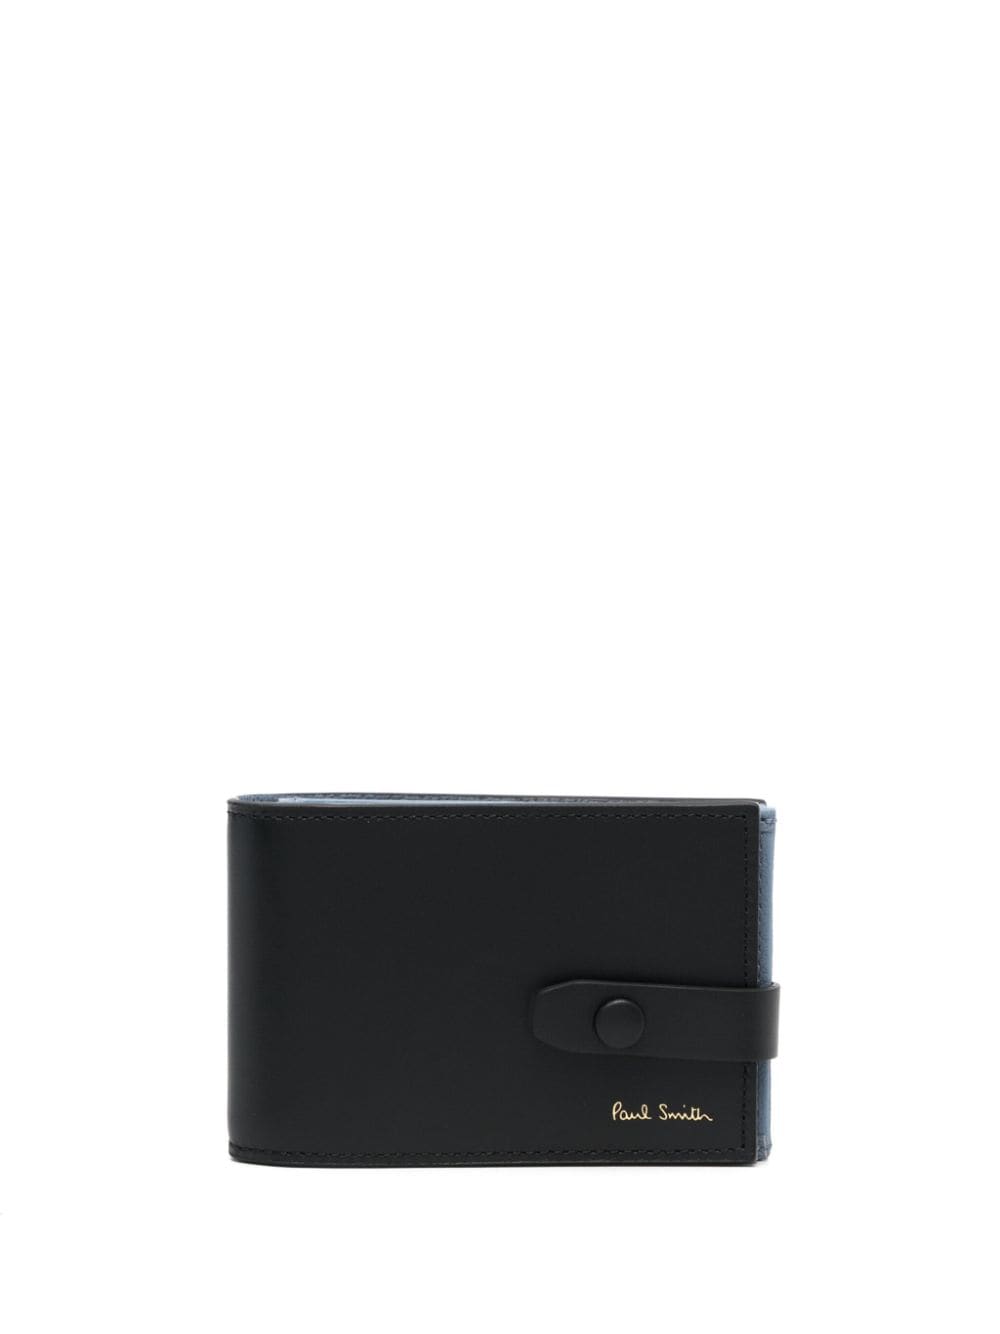 Paul Smith logo-embossed leather wallet - Black von Paul Smith